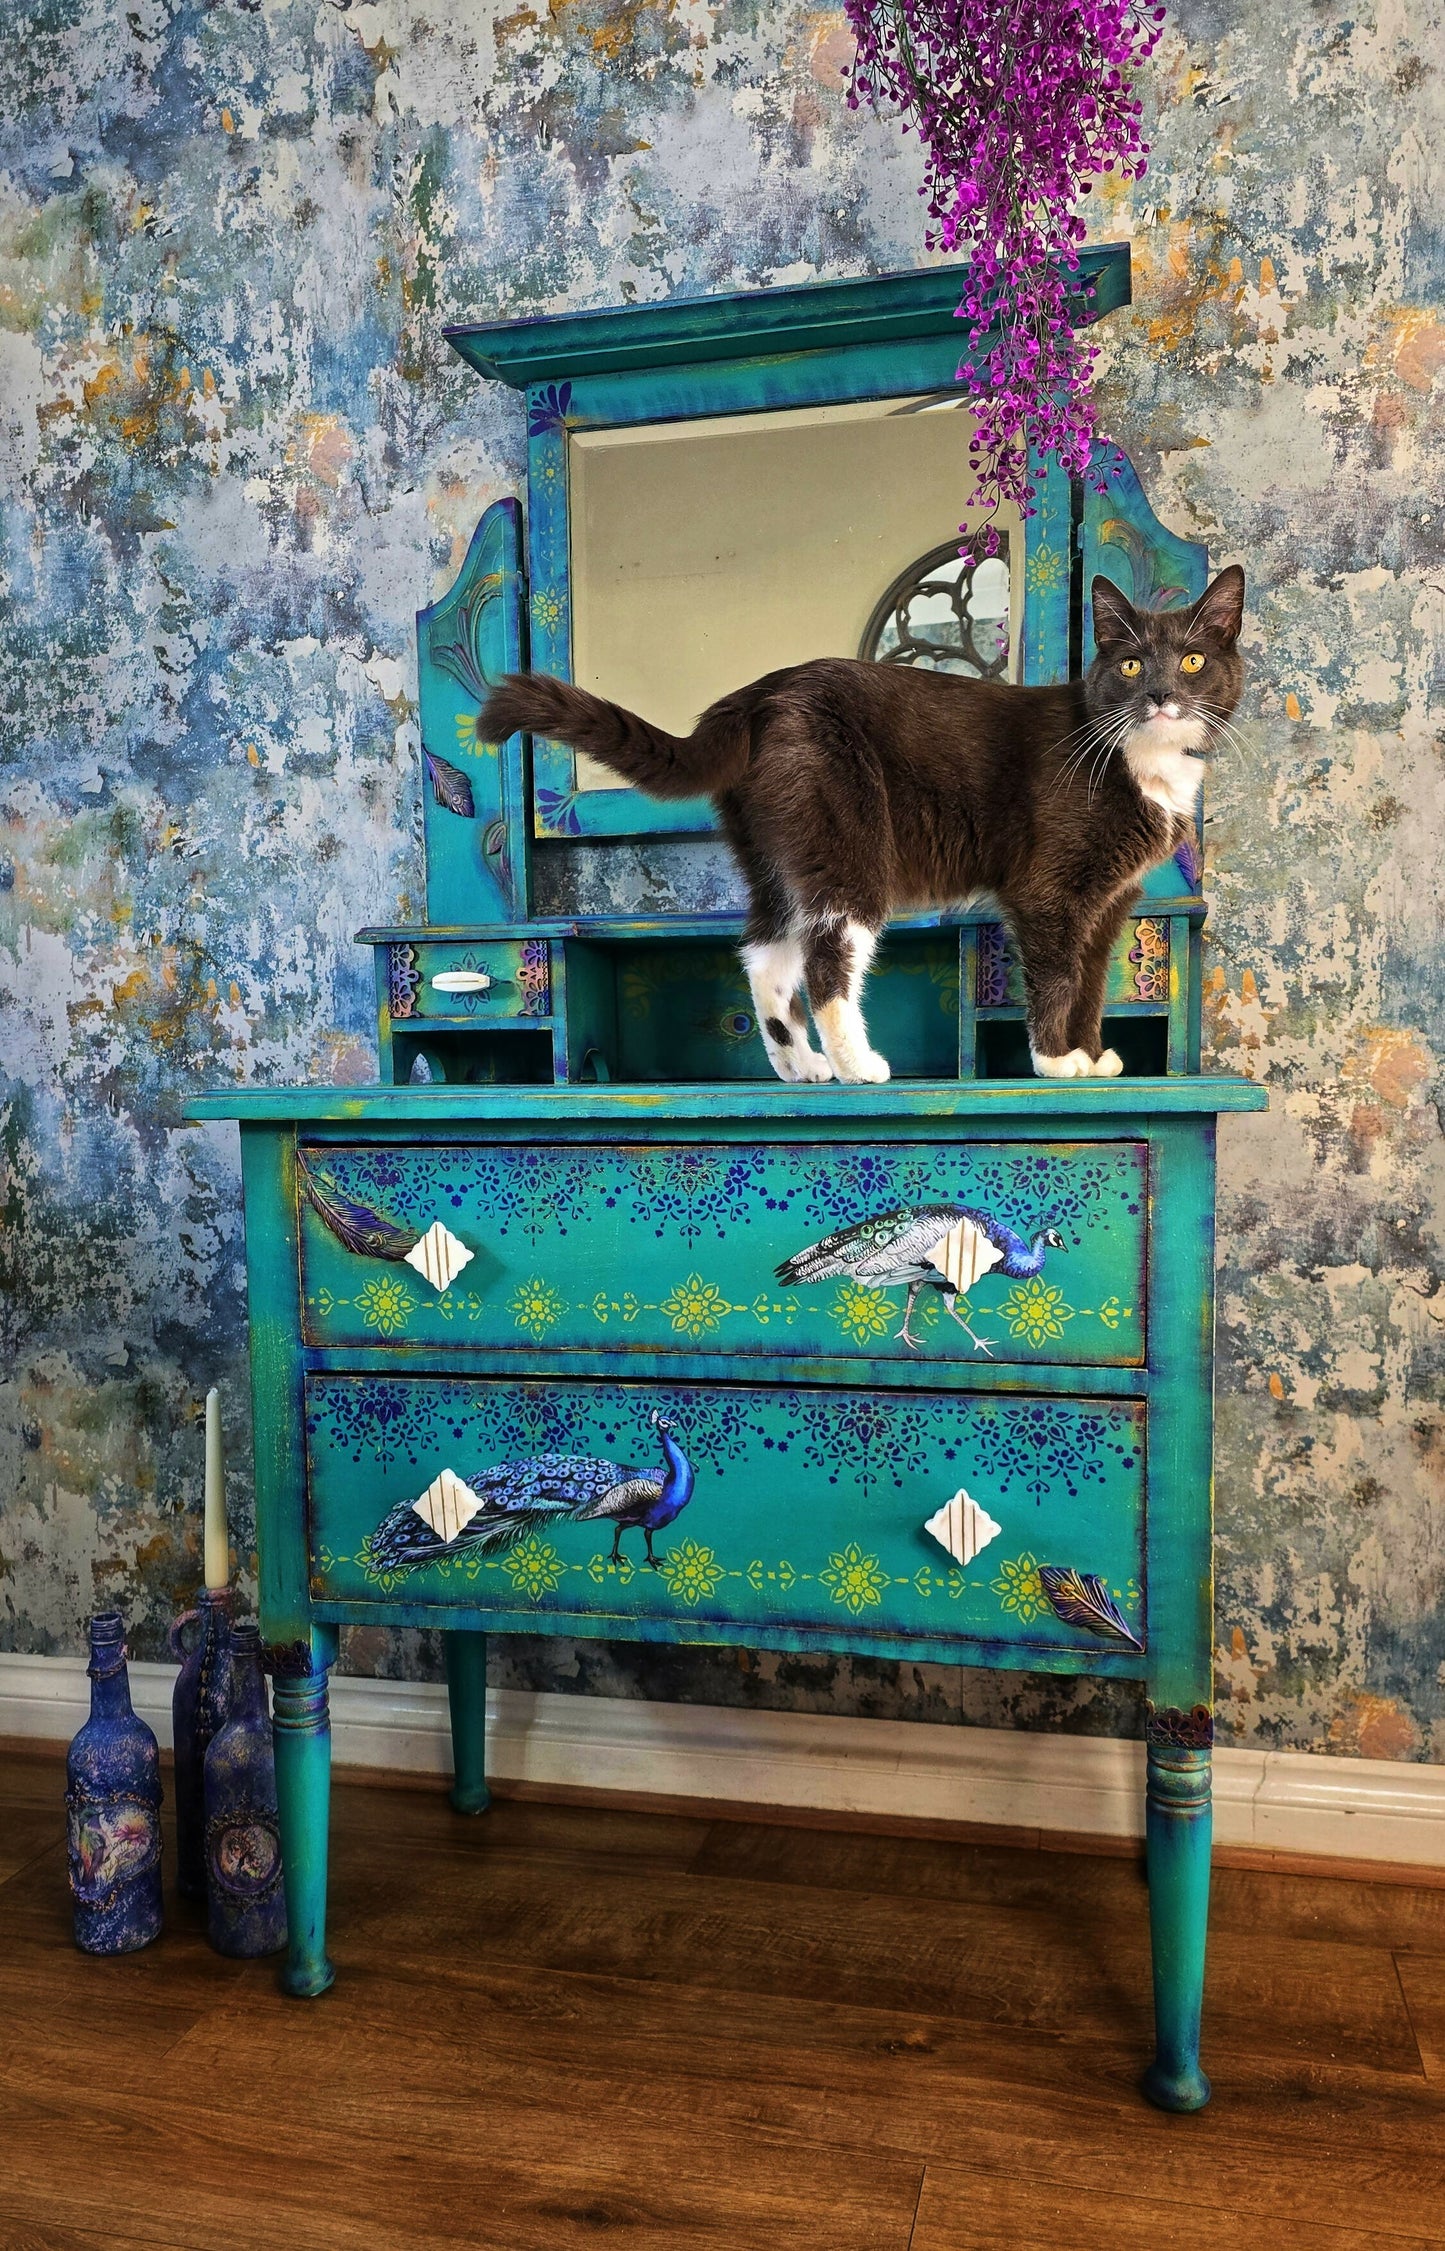 Upcycled peacock design dressing table